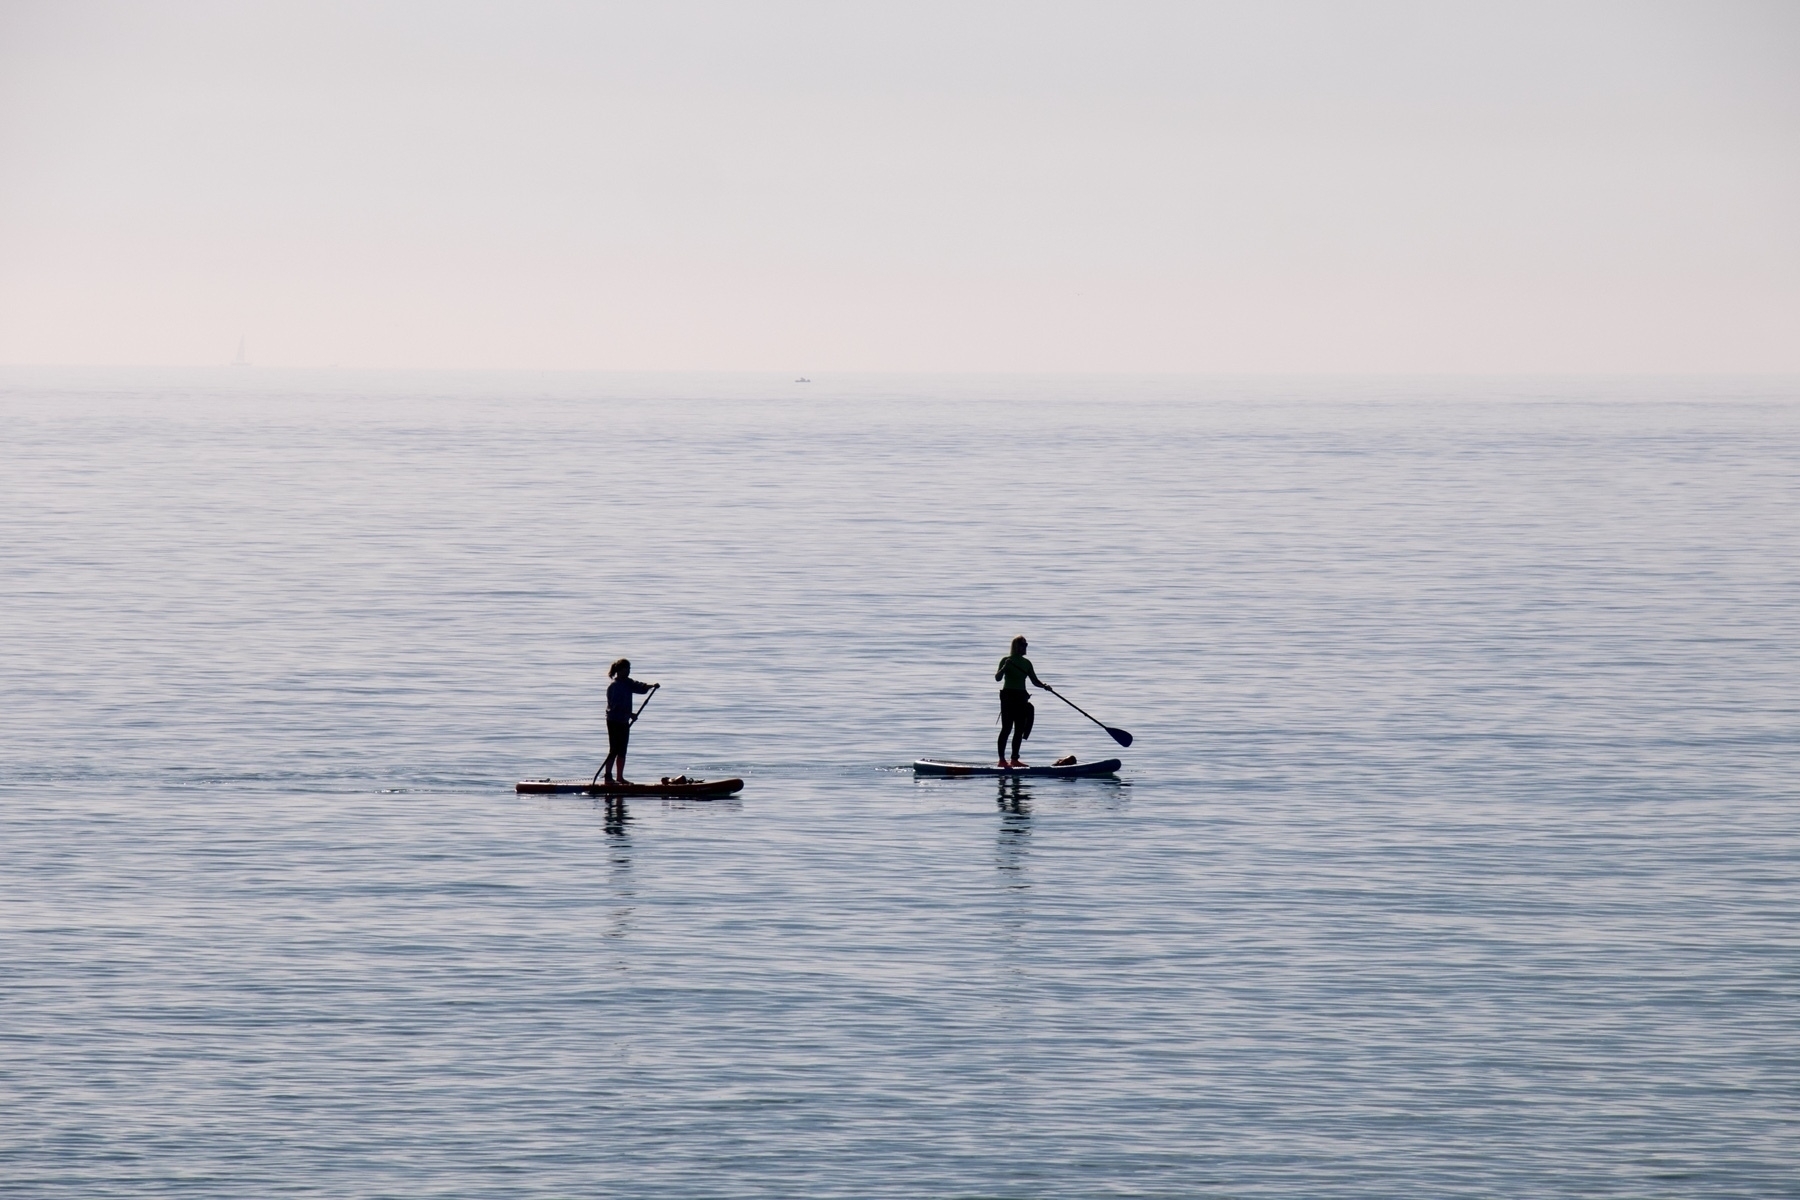 Two stand up paddleboarders on the Sussex sea. 